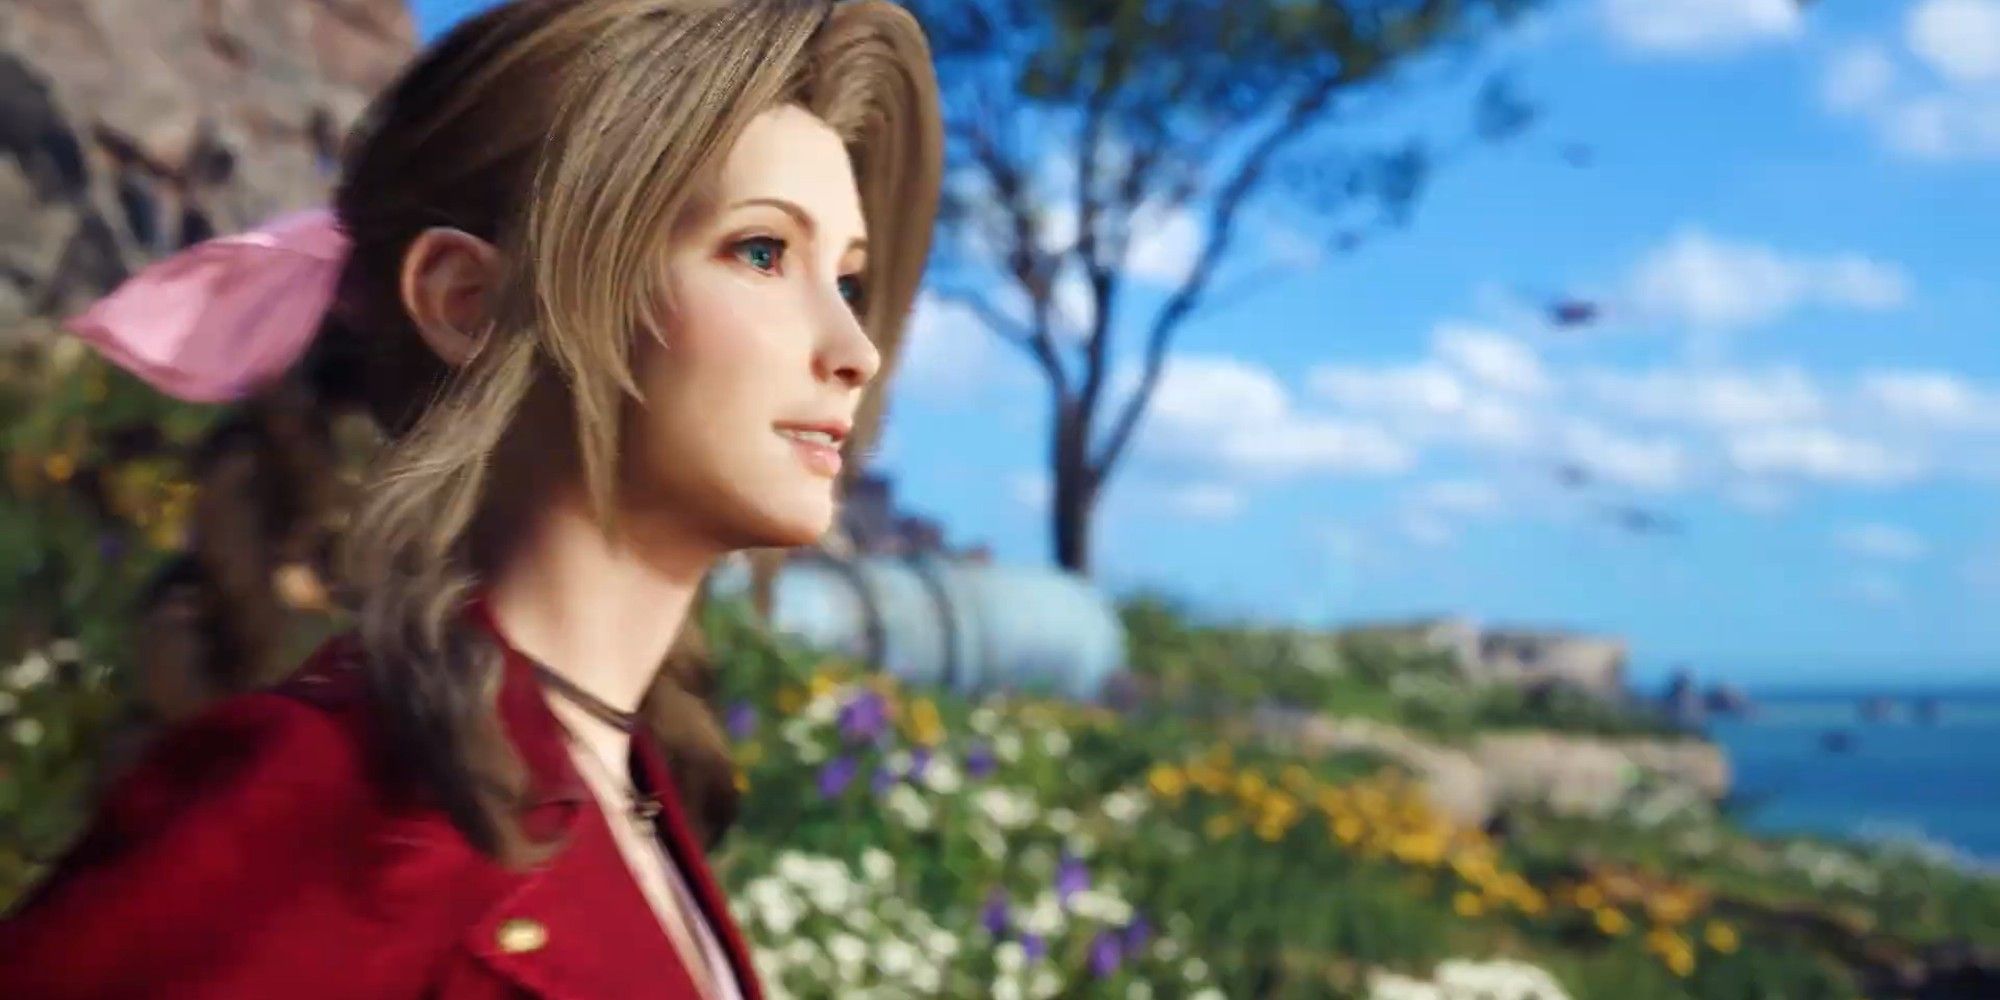 Aerith Gainsborough looking at the sky and smiling